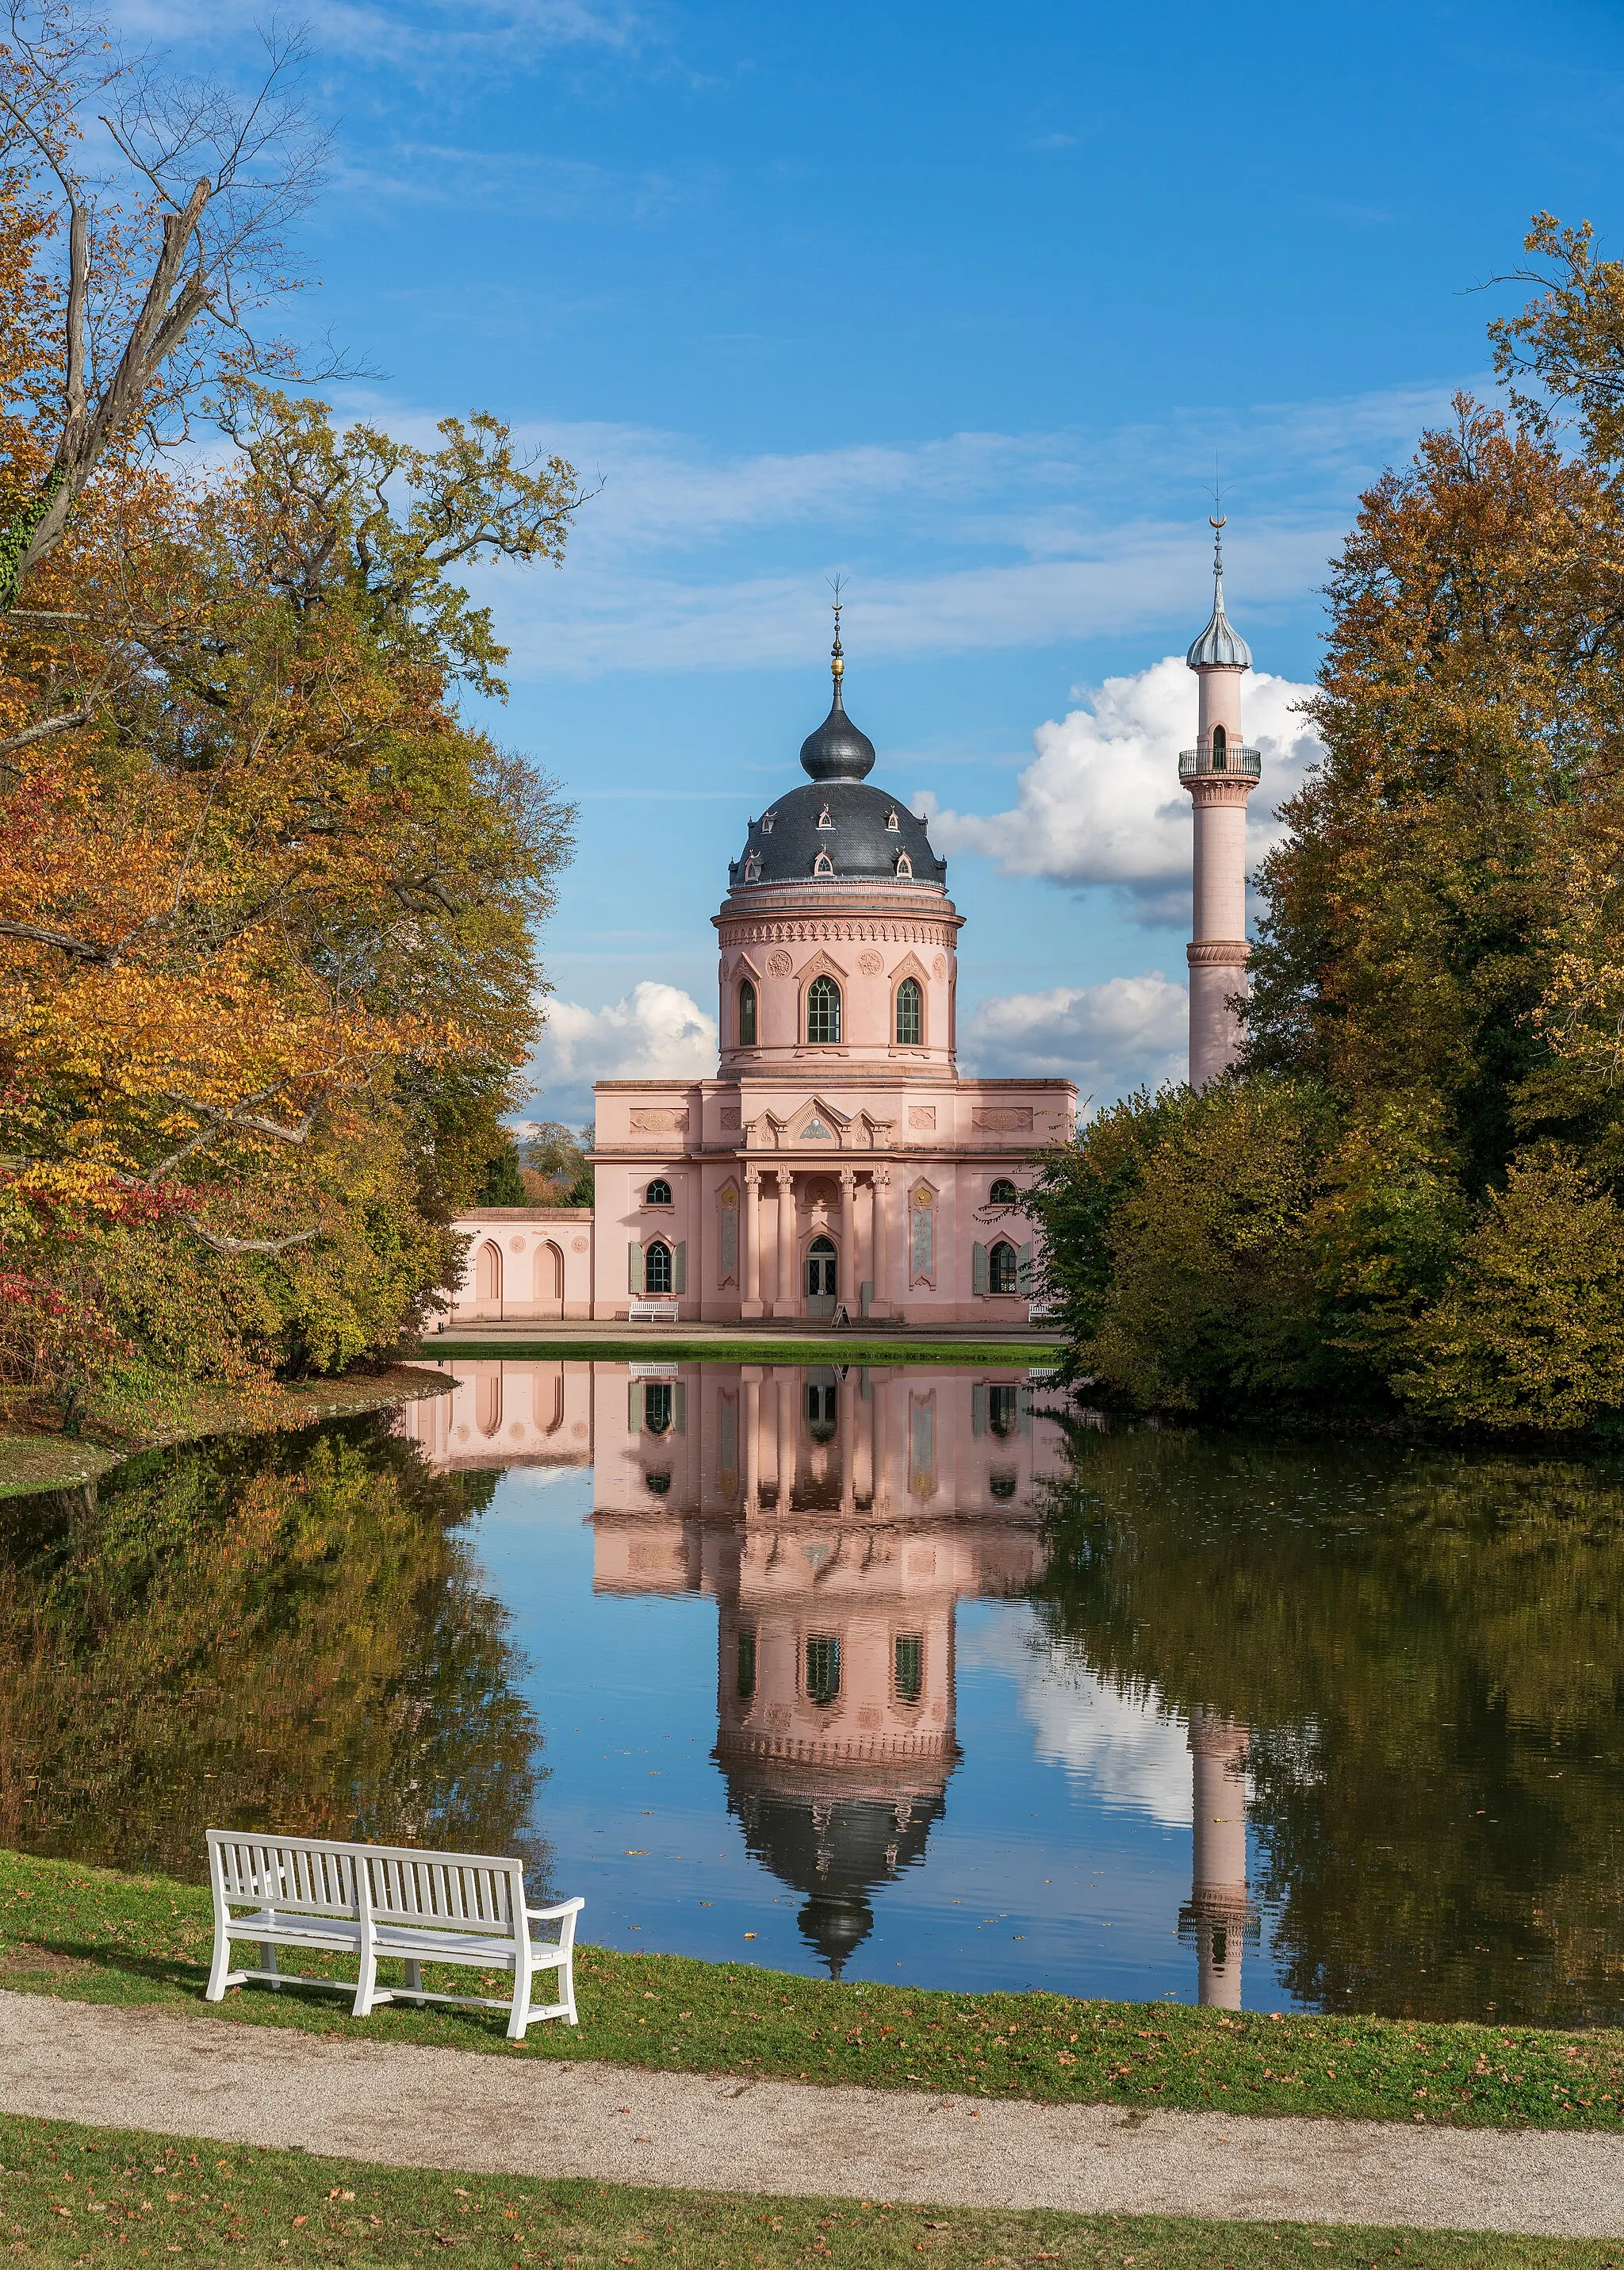 Photo showing: Autumn view of the Red mosque in the gardens of Schwetzingen Palace, Germany. This listed building, constructed in 1779–1795 by Nicolas de Pigage as the first mosque-style building in Germany, was never a real Muslim mosque but was supposed to express the tolerance of the Enlightenment towards all religions. The photograph includes the so-called Moscheeweiher in front of the building, because the mosque was deliberately planned by de Pigage as a component of the park, and so I consider this as the view intended by de Pigage.
It was not possible to show the mosque completely from this point of view, as the trees always cover parts of it. But these trees are a part of the park ensemble, too, at least in its current state.